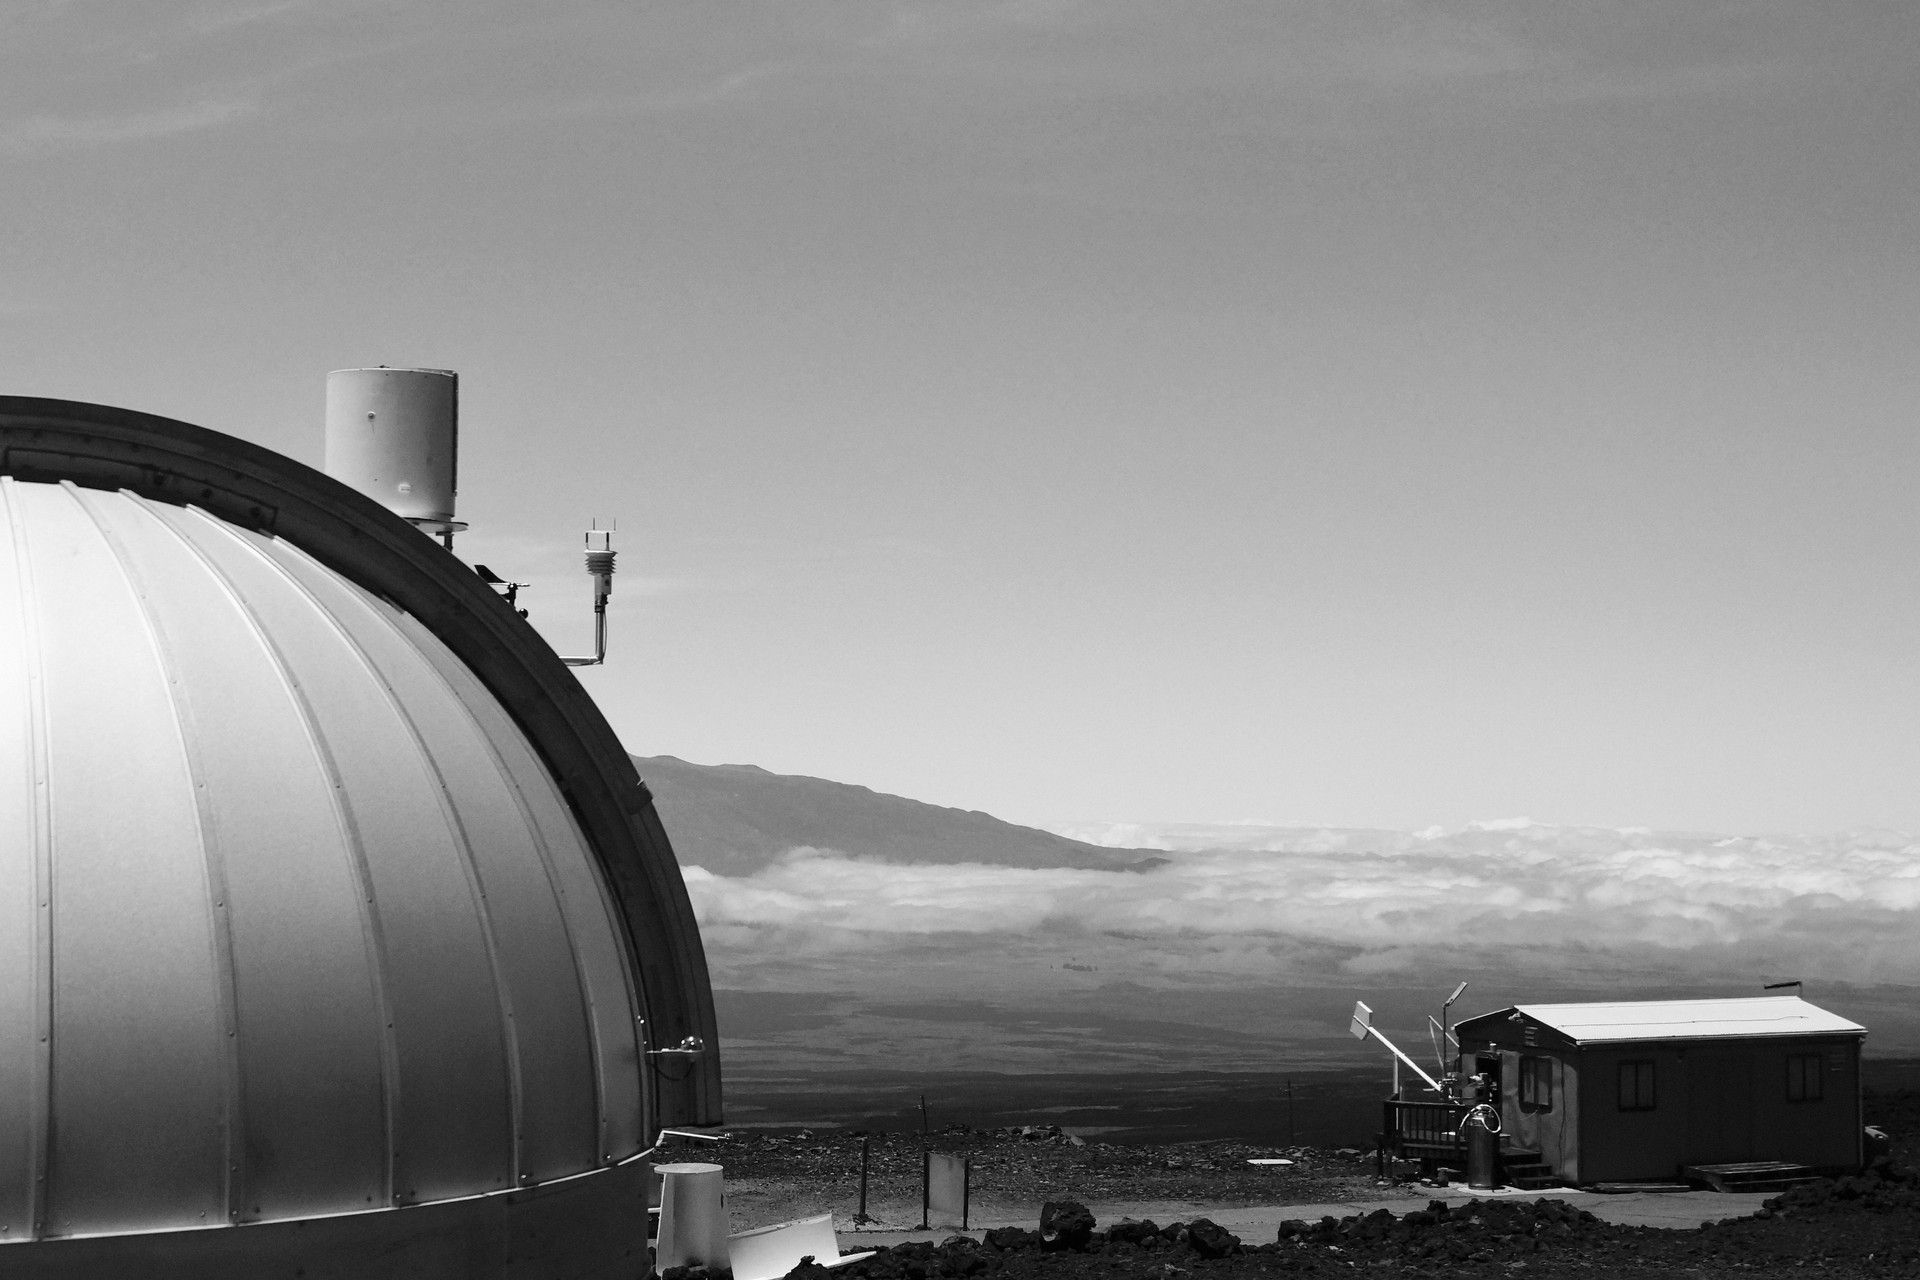 White dome of the Mauna Loa Observatory, with the Mauna Kea mountain in the background